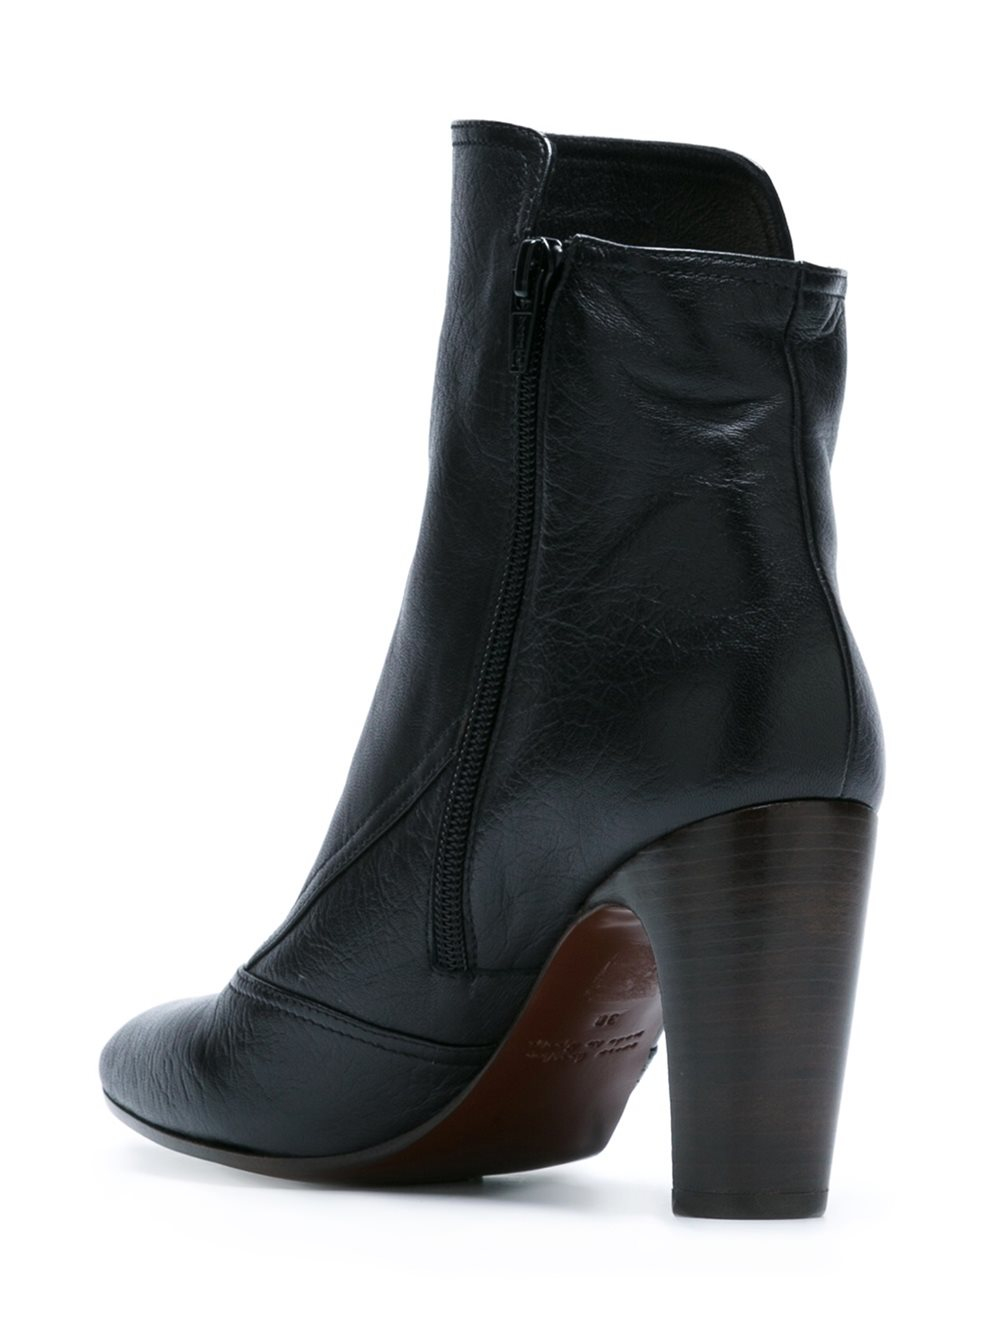 Chie mihara 'Feishung' Boots in Black | Lyst